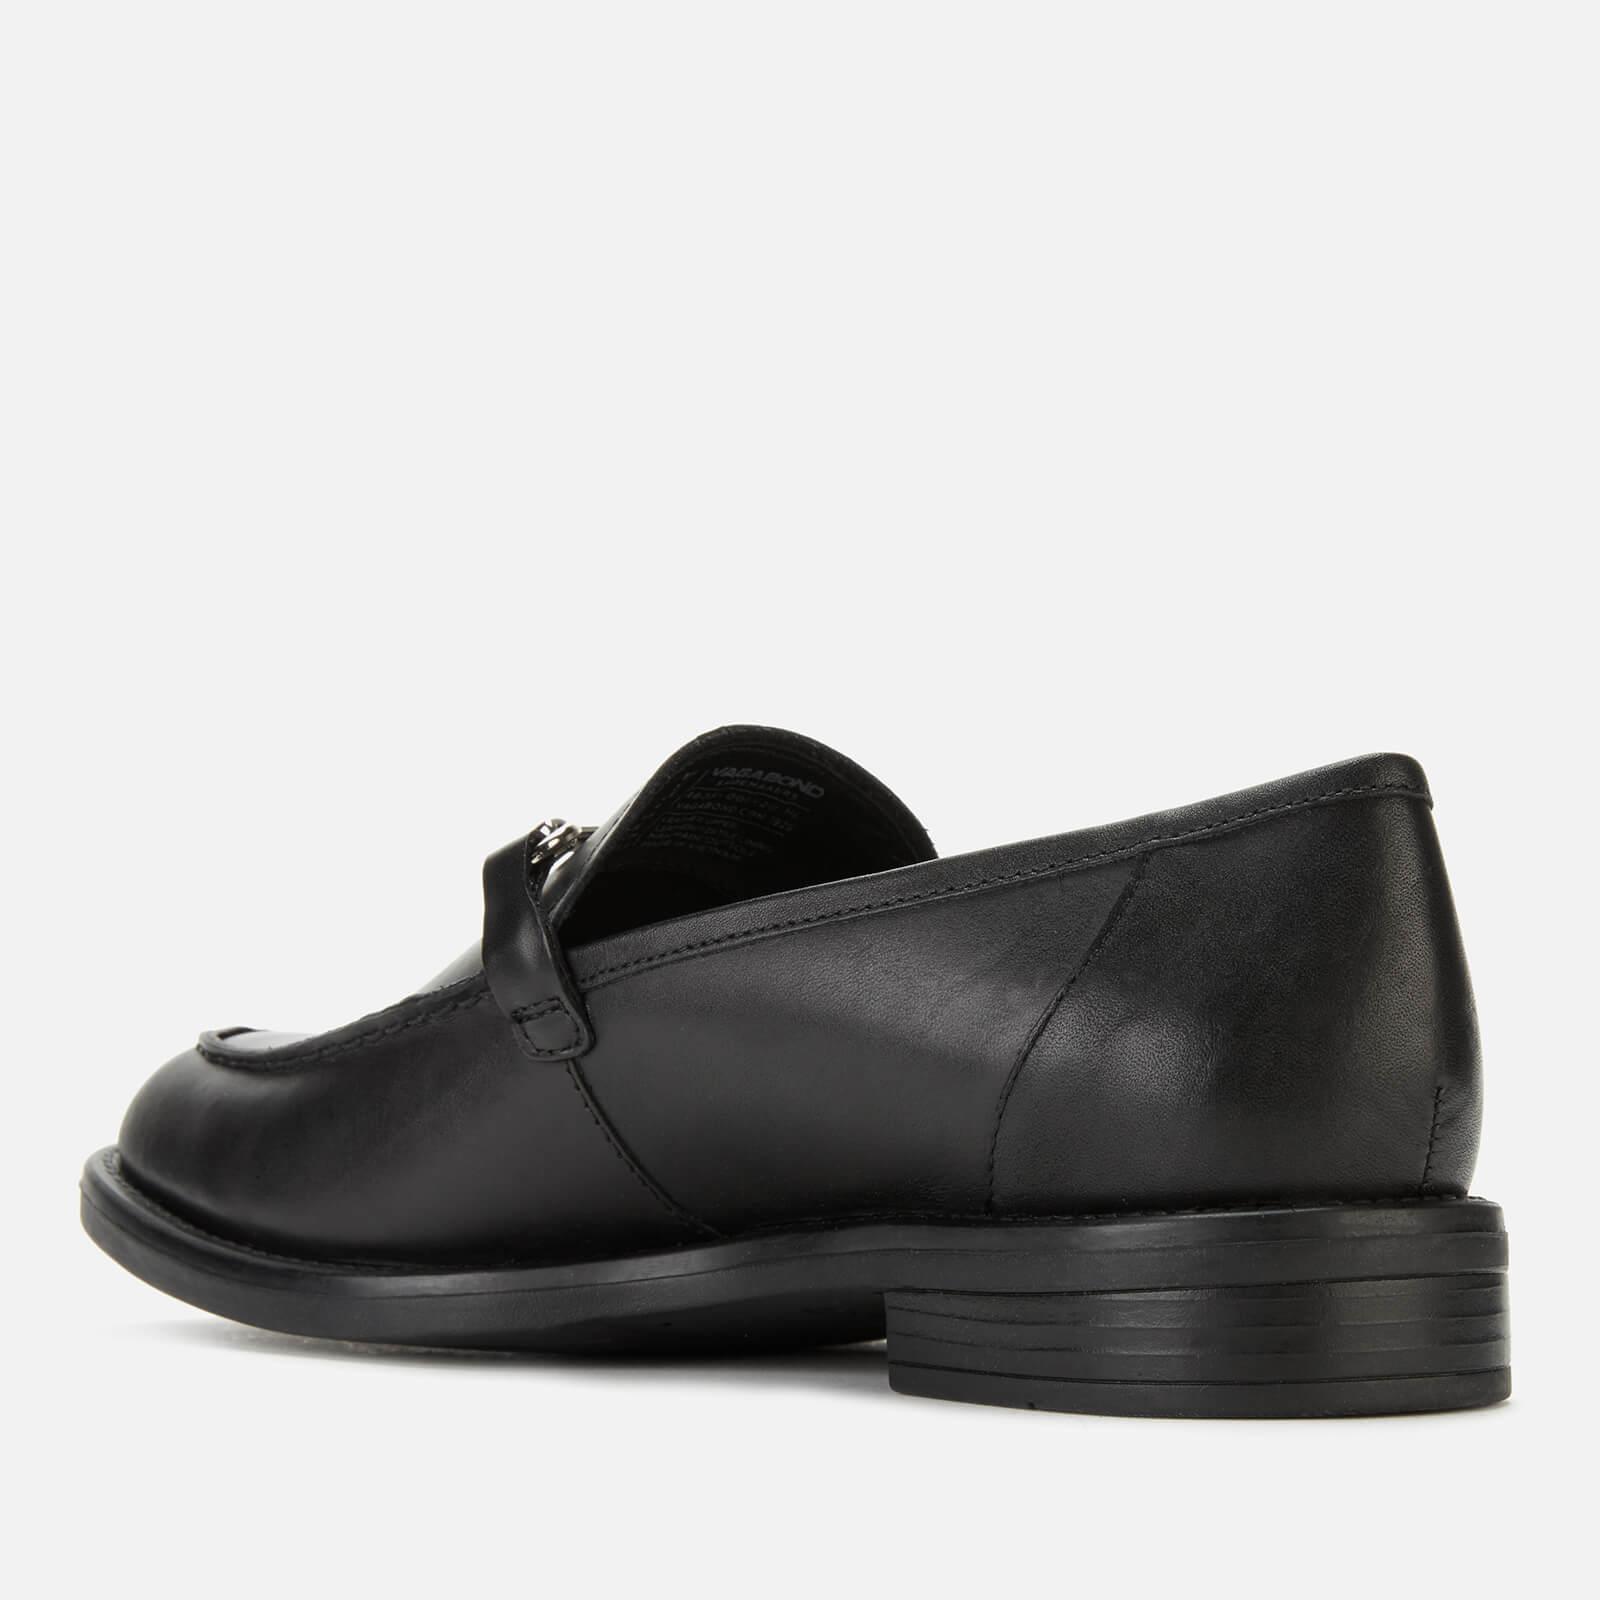 Vagabond Amina Leather Loafers in Black - Lyst